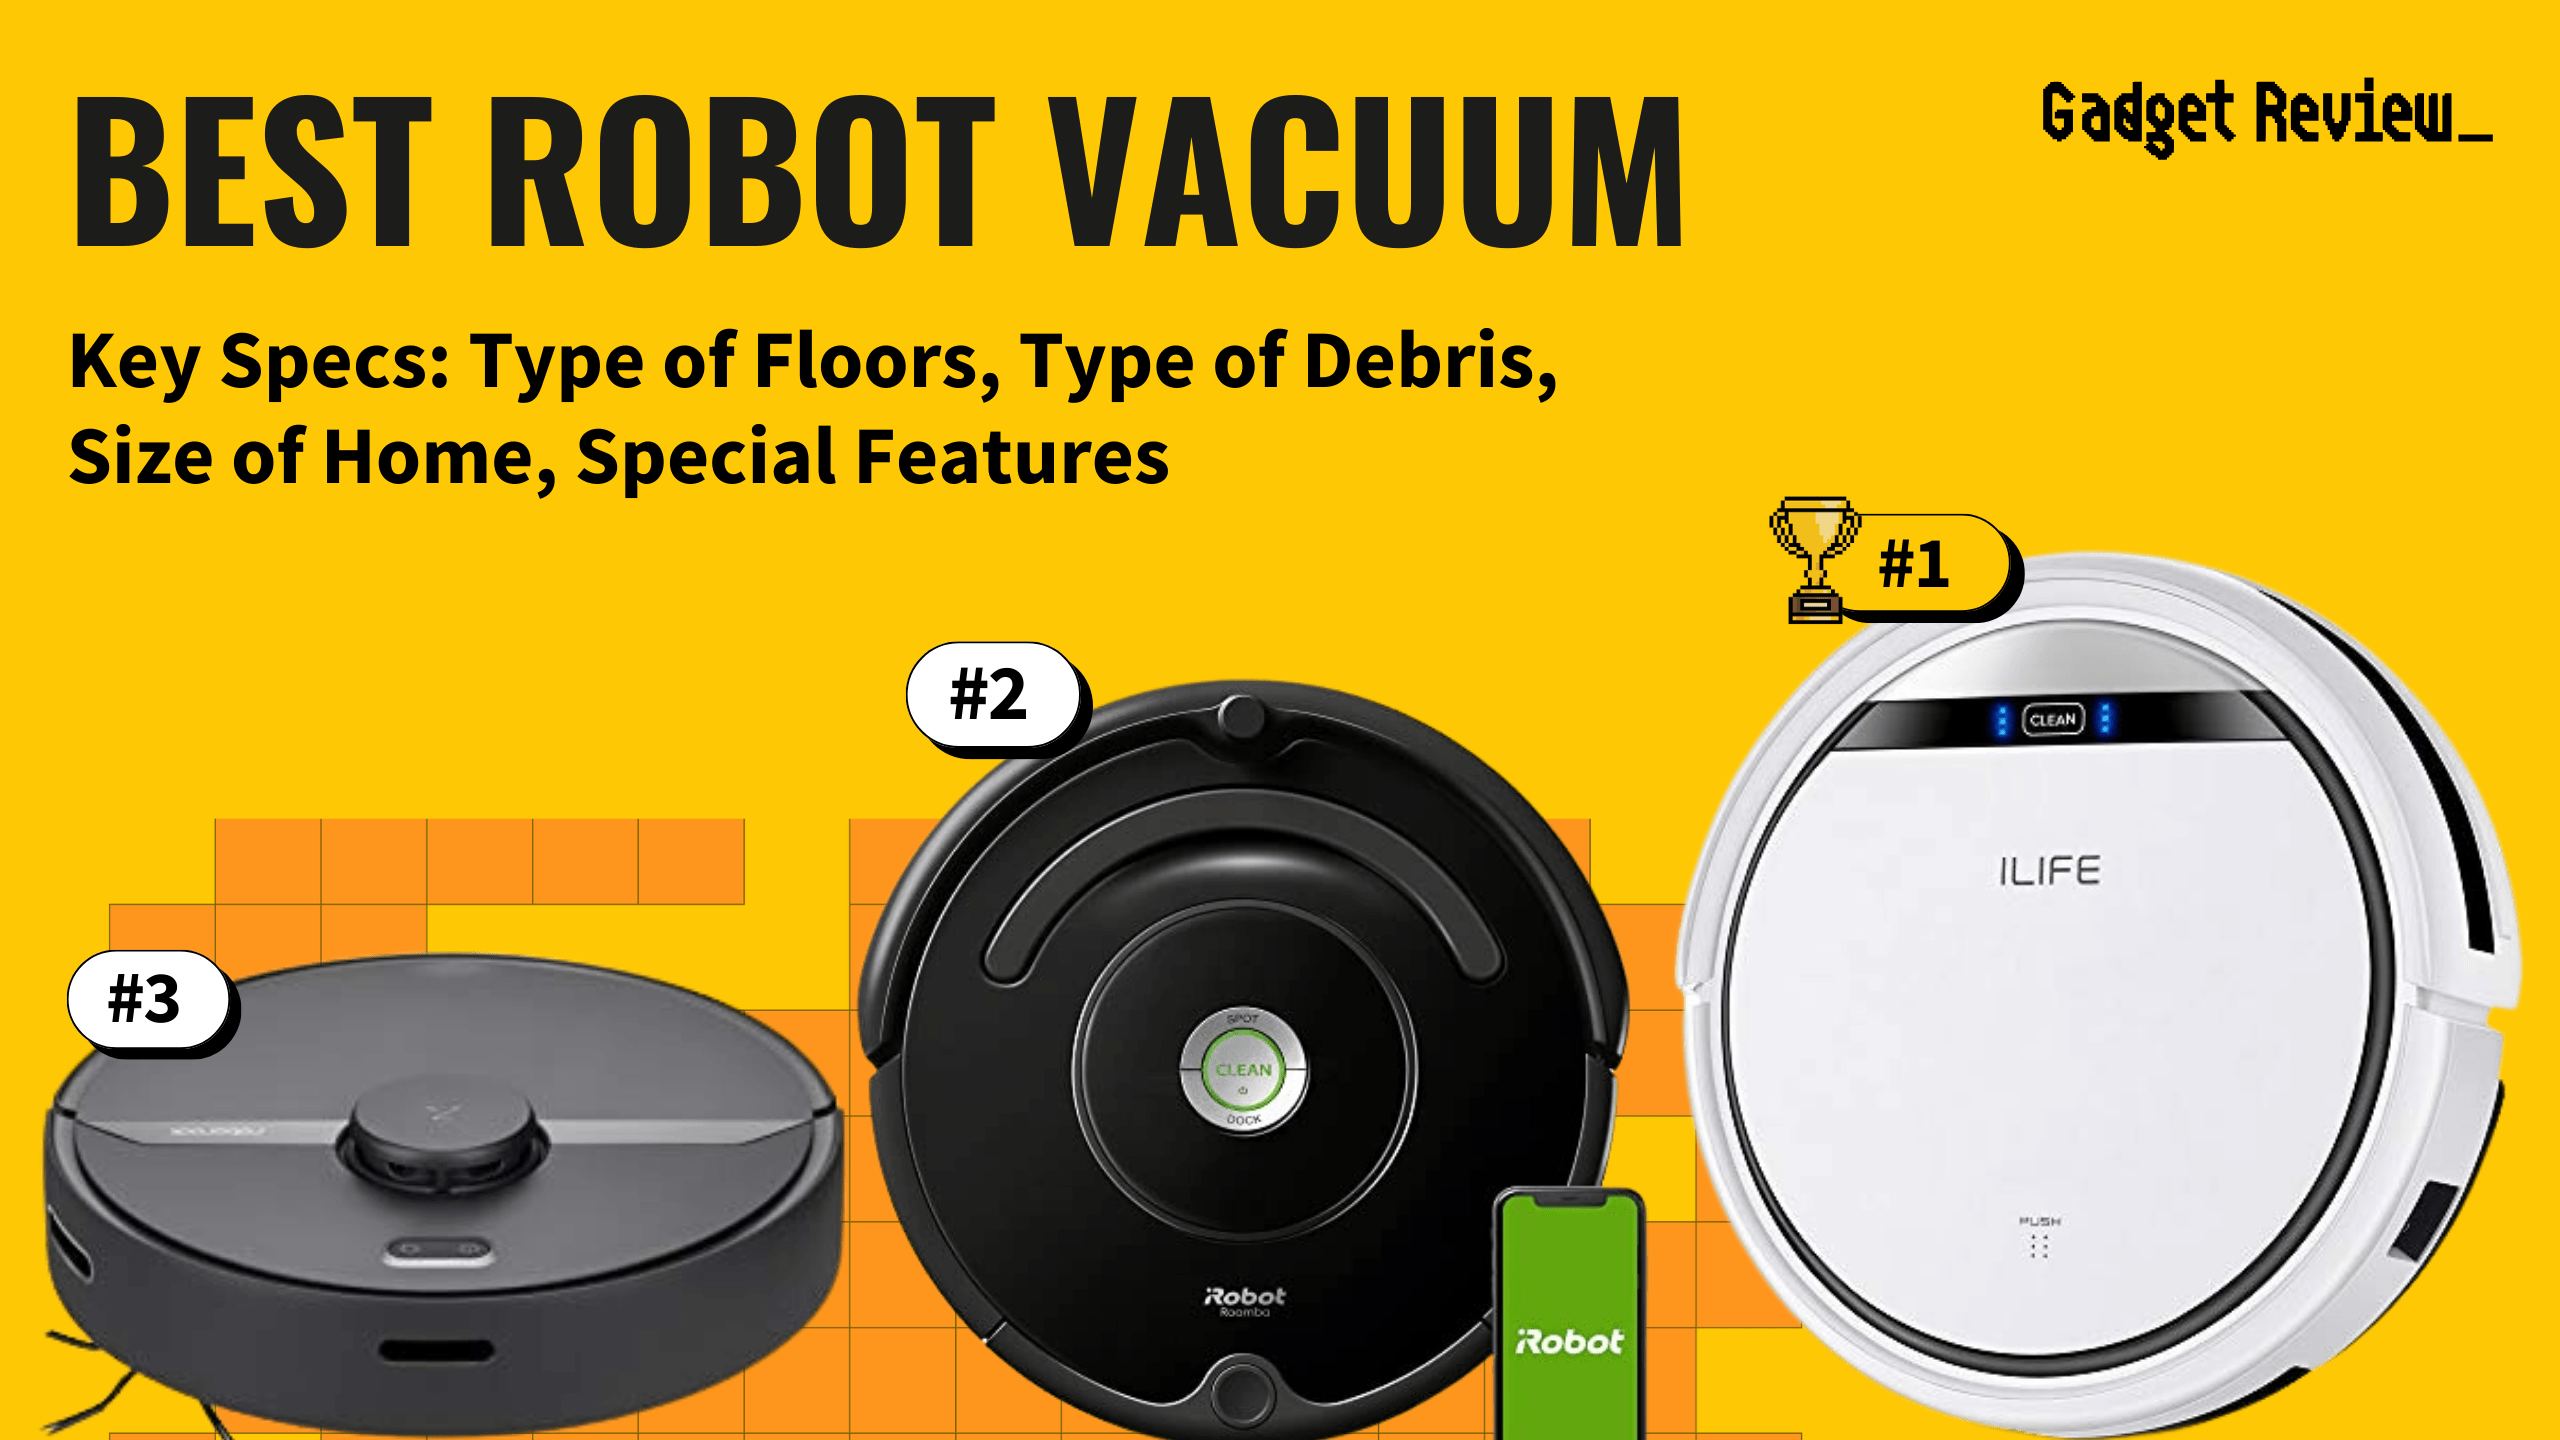 best robot vacuum guide that shows the top best vacuum cleaner model